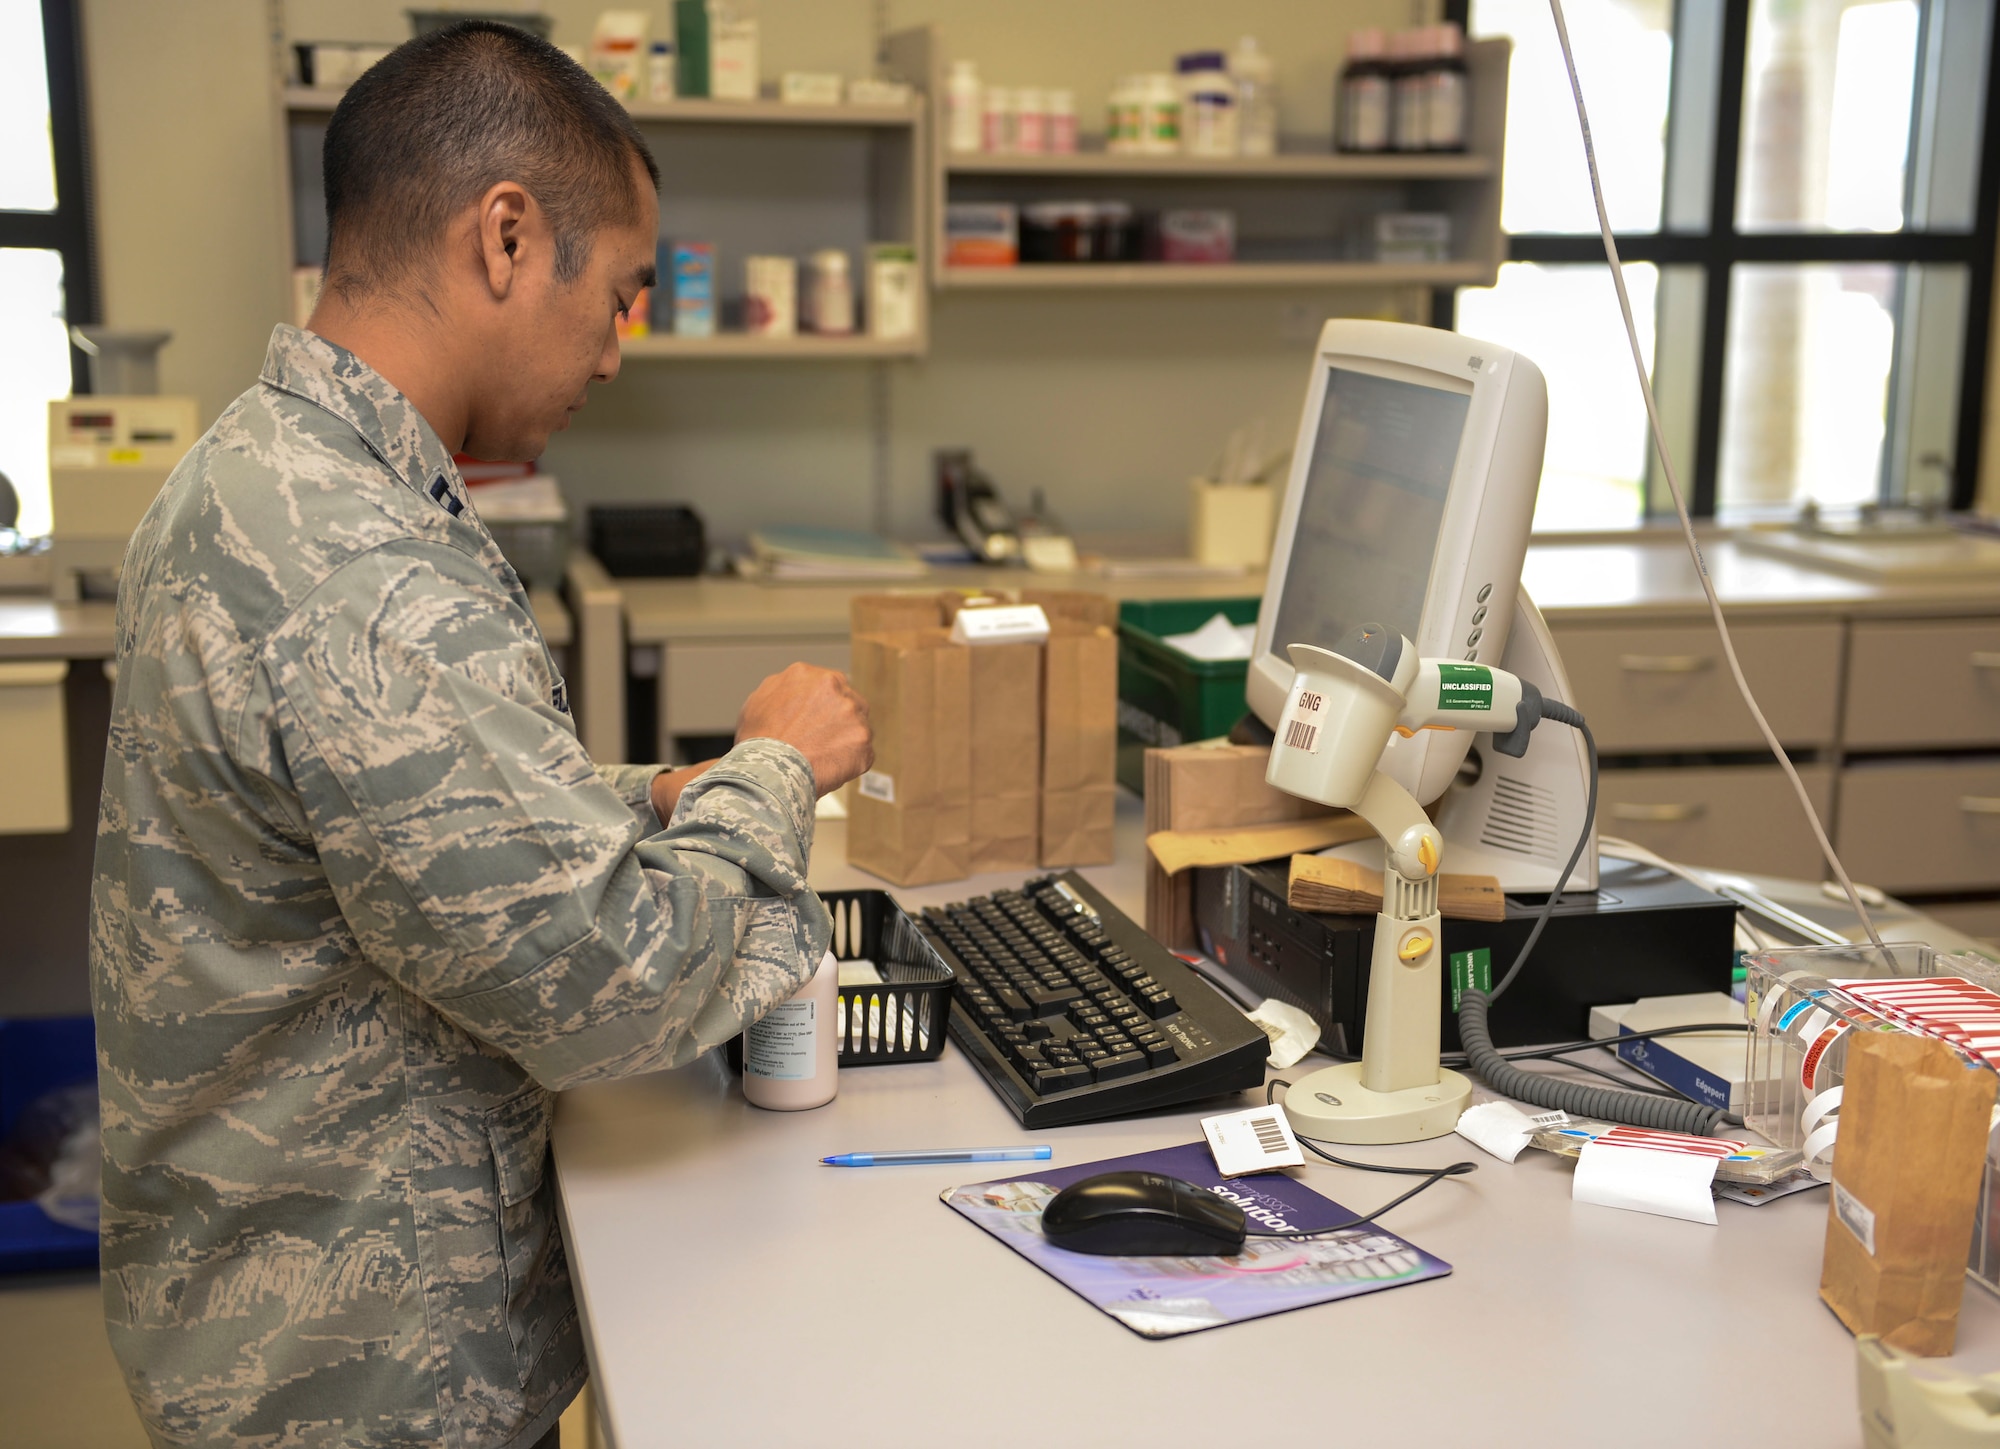 Capt. Ronald Elazegui, 36th Medical Support Squadron pharmacist, prepares prescriptions for Team Andersen members July 1, 2015, at Andersen Air Force Base, Guam. On average, the pharmacy fills and dispenses 150 prescriptions a day. (U.S. Air Force photo by Airman 1st Class Joshua Smoot/Released)